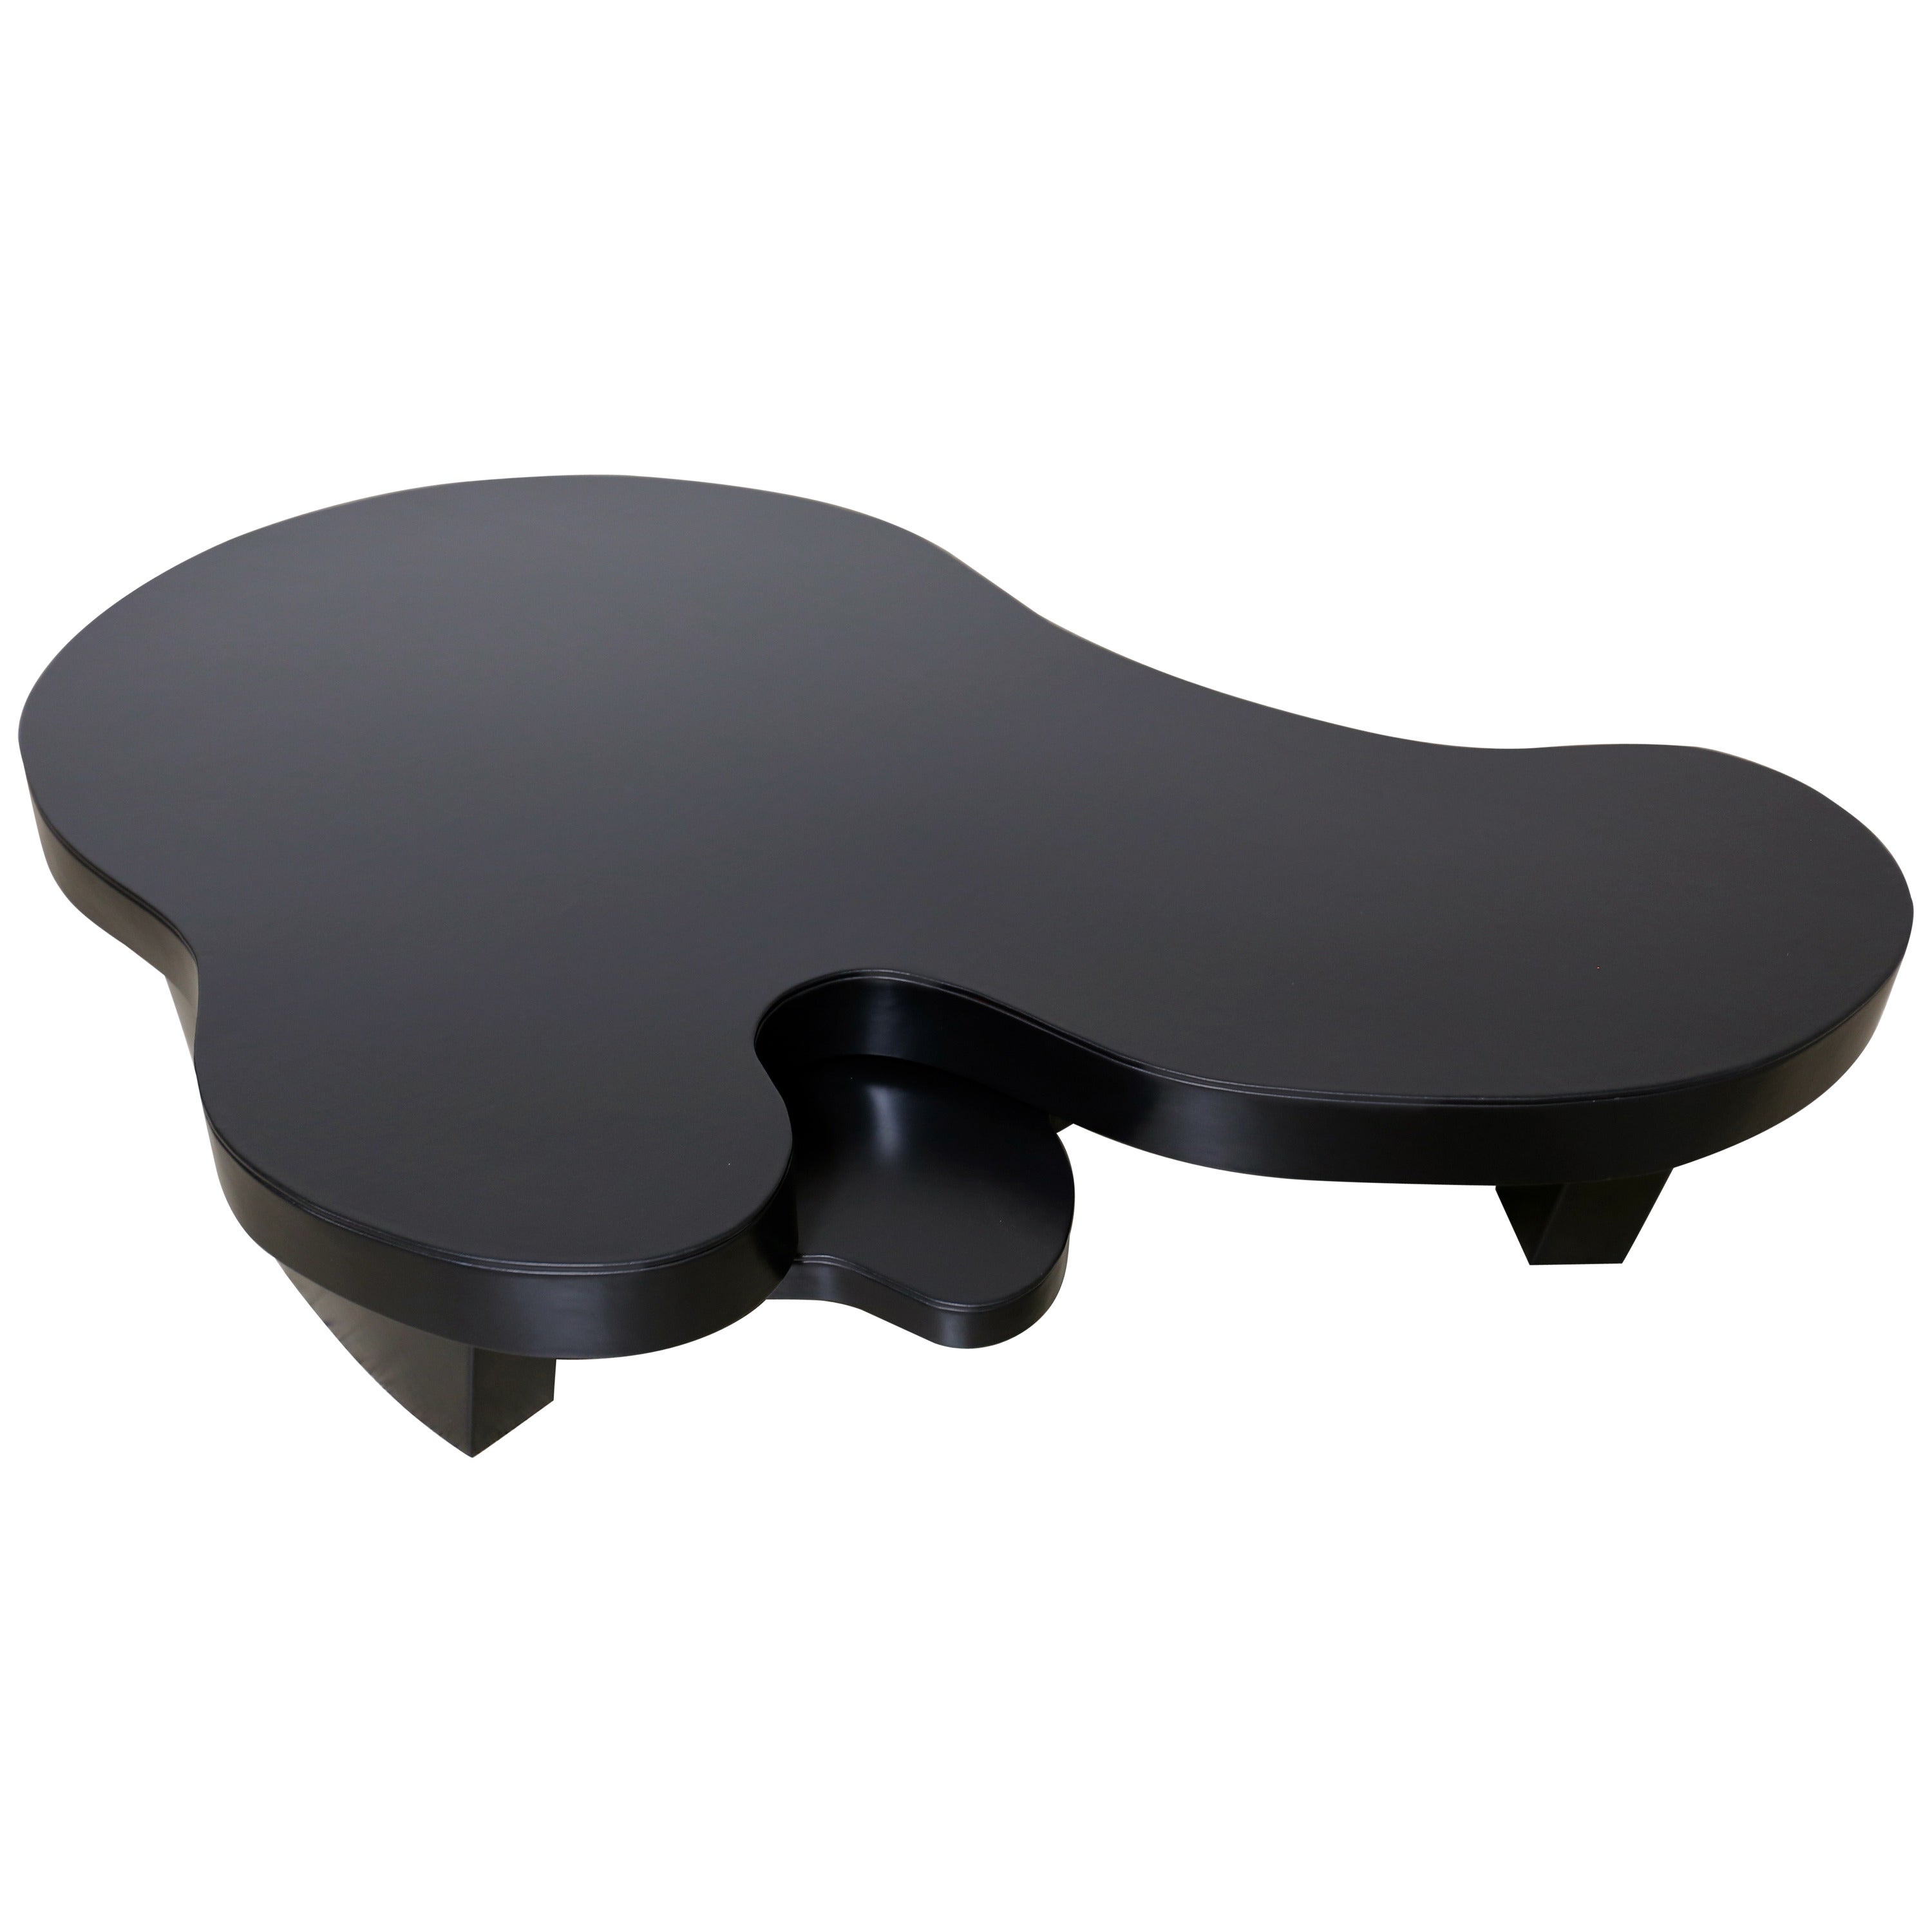 Large Leather Wrapped Biomorphic Coffee Table